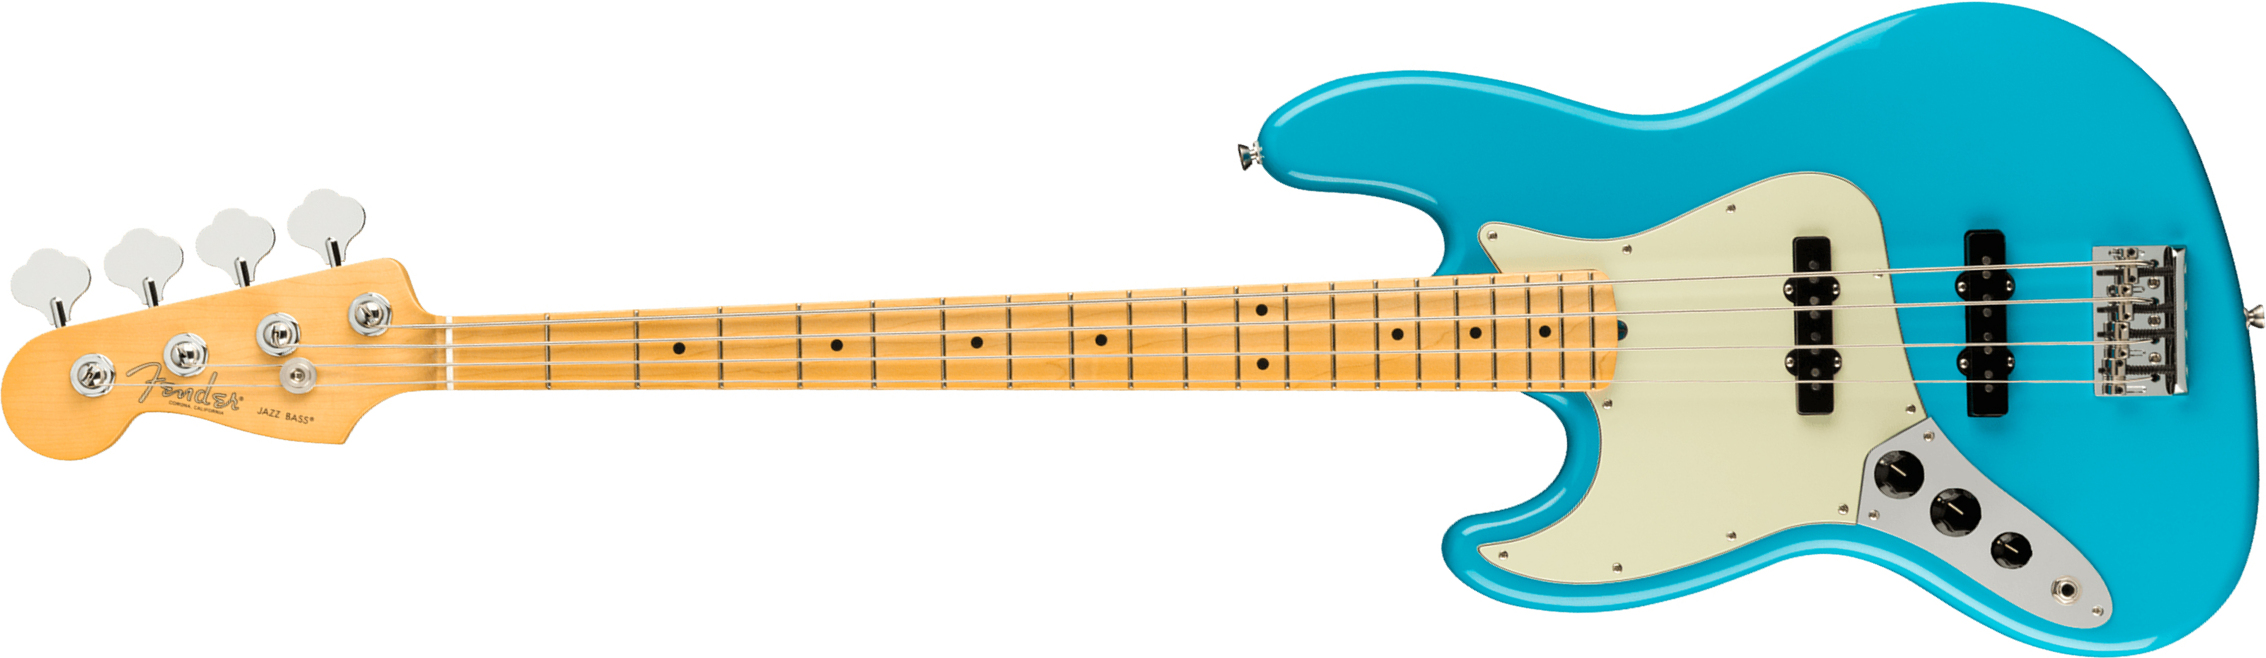 Fender Jazz Bass American Professional Ii Lh Gaucher Usa Mn - Miami Blue - Basse Électrique Solid Body - Main picture